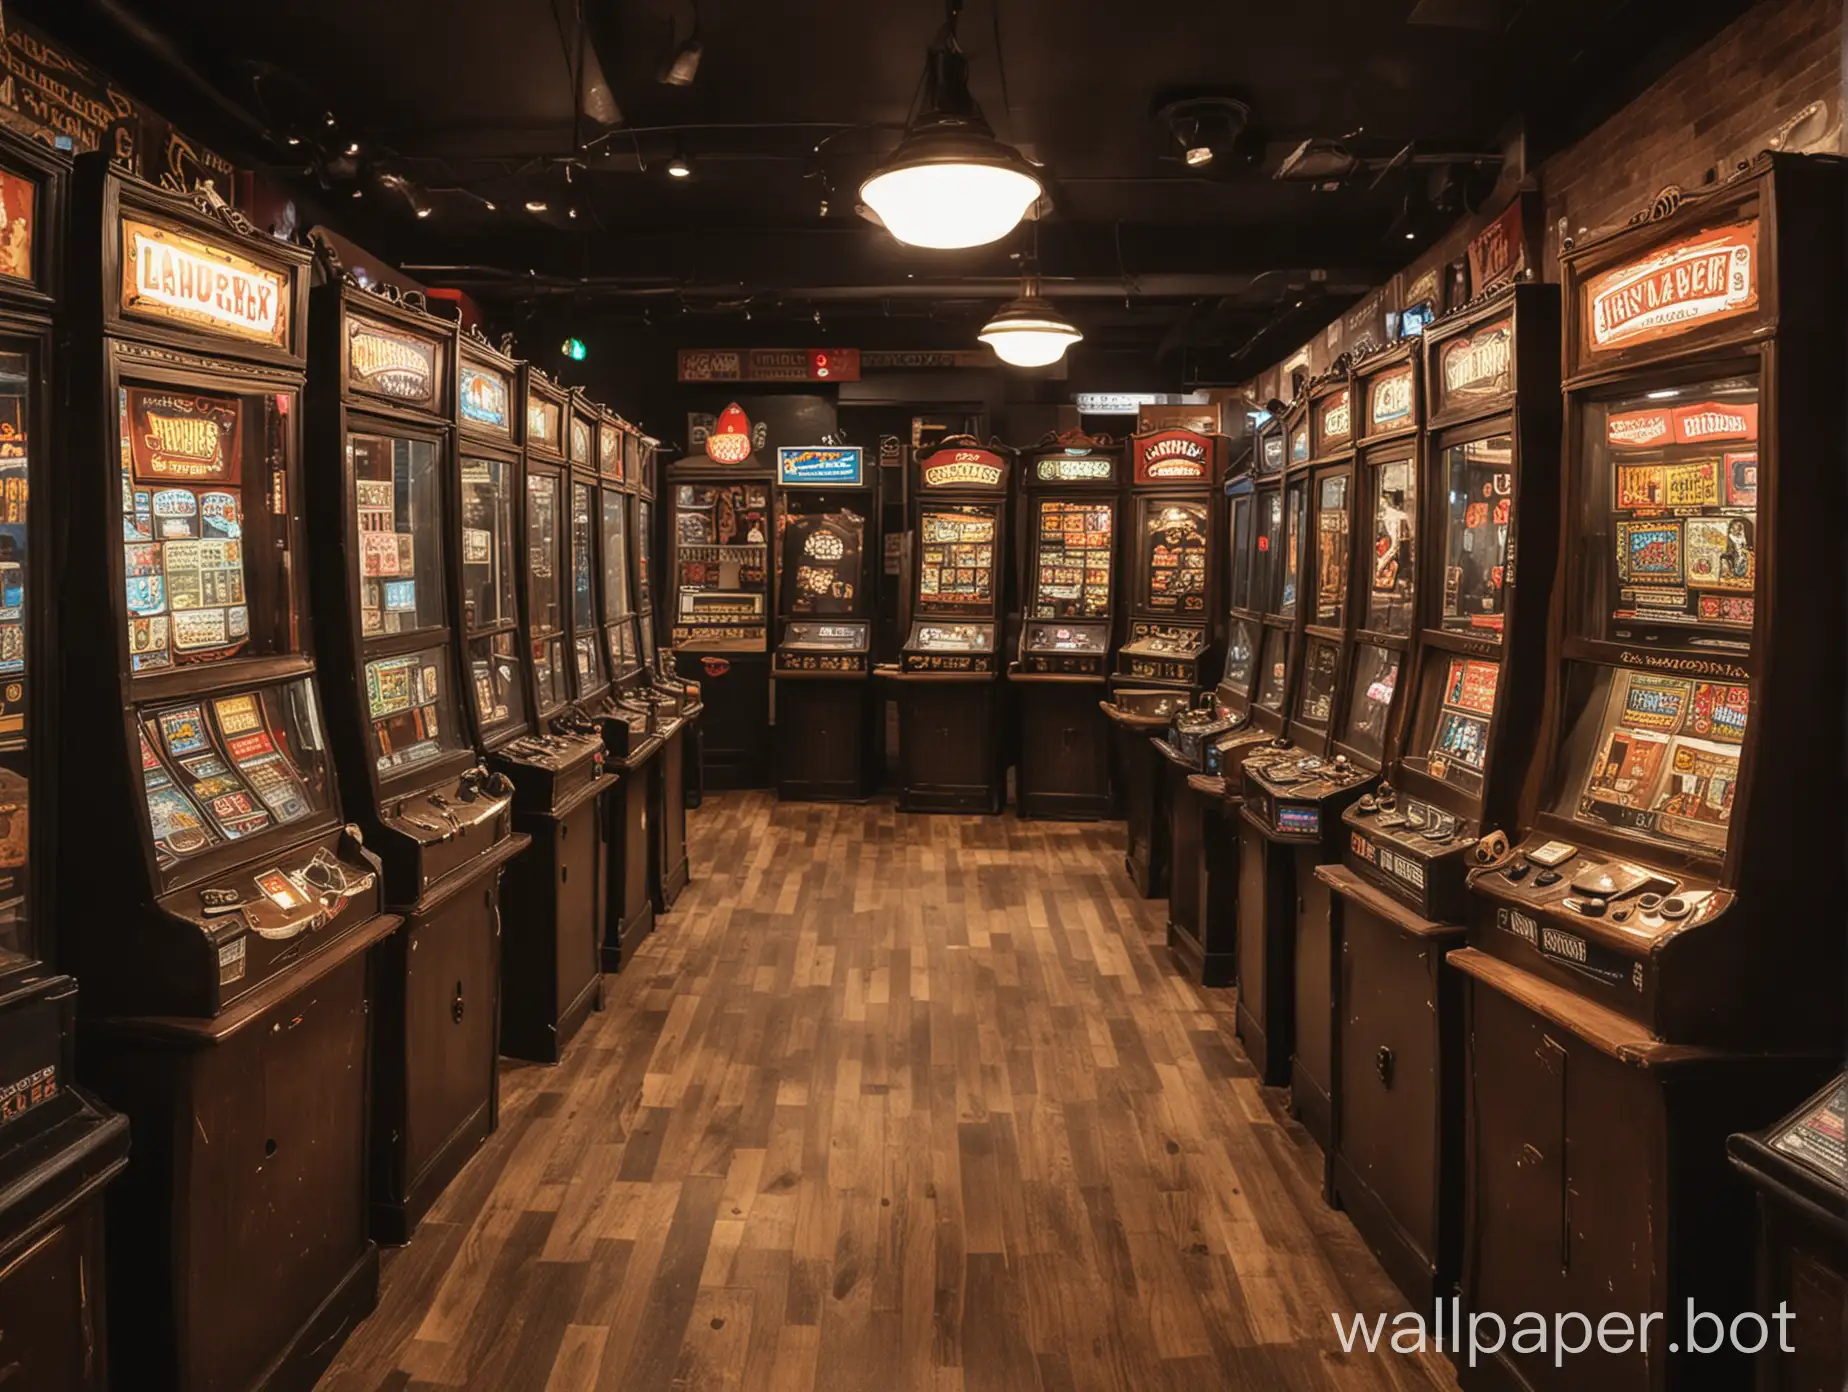 Vibrant-Scene-Inside-a-Penny-Arcade-with-Arcade-Games-and-Diverse-Crowd